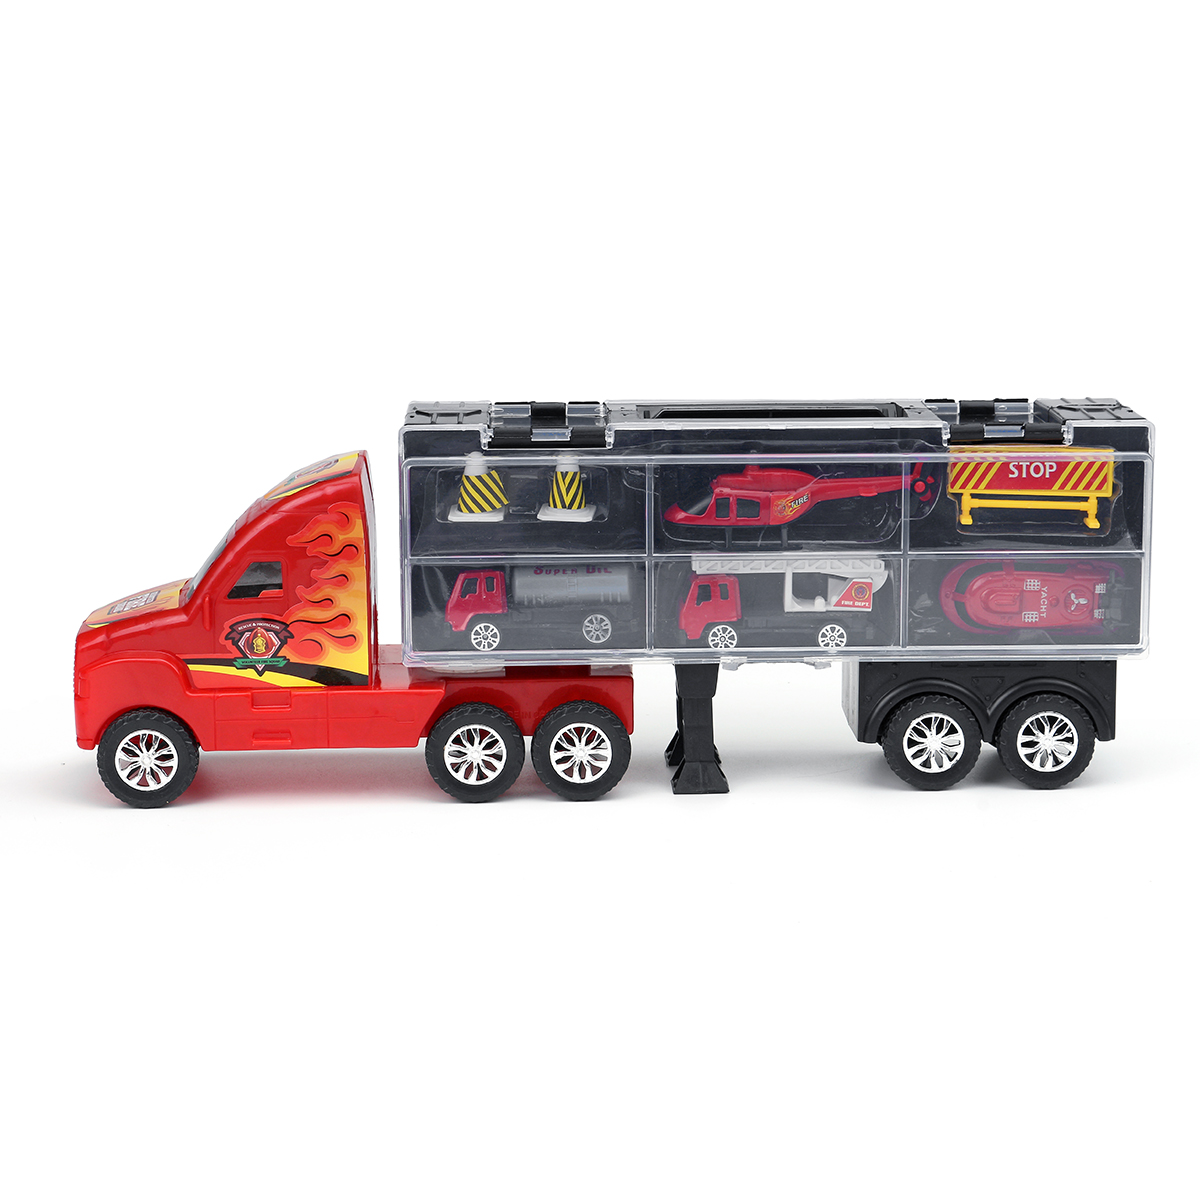 Alloy-Trailer-Container-Car-Storage-Box-Diecast-Car-Model-Set-Toy-for-Childrens-Gift-1635959-6